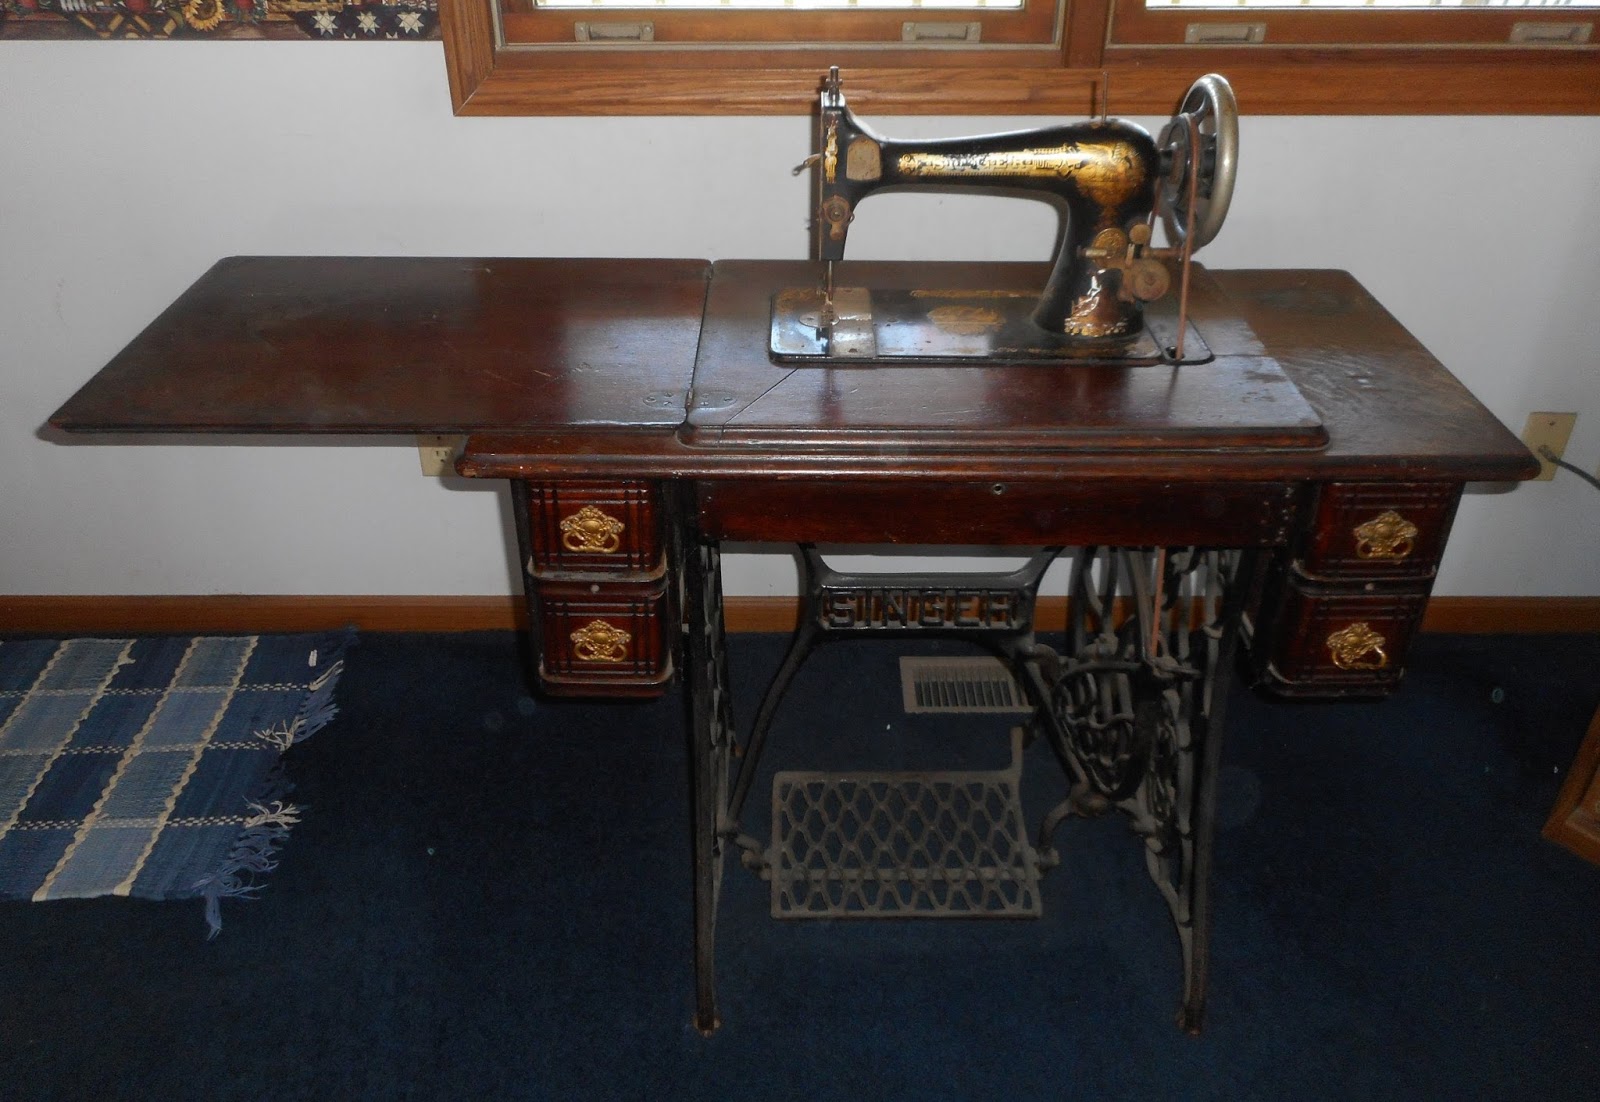 Terry's Treasures: Treadle sewing machine for sale